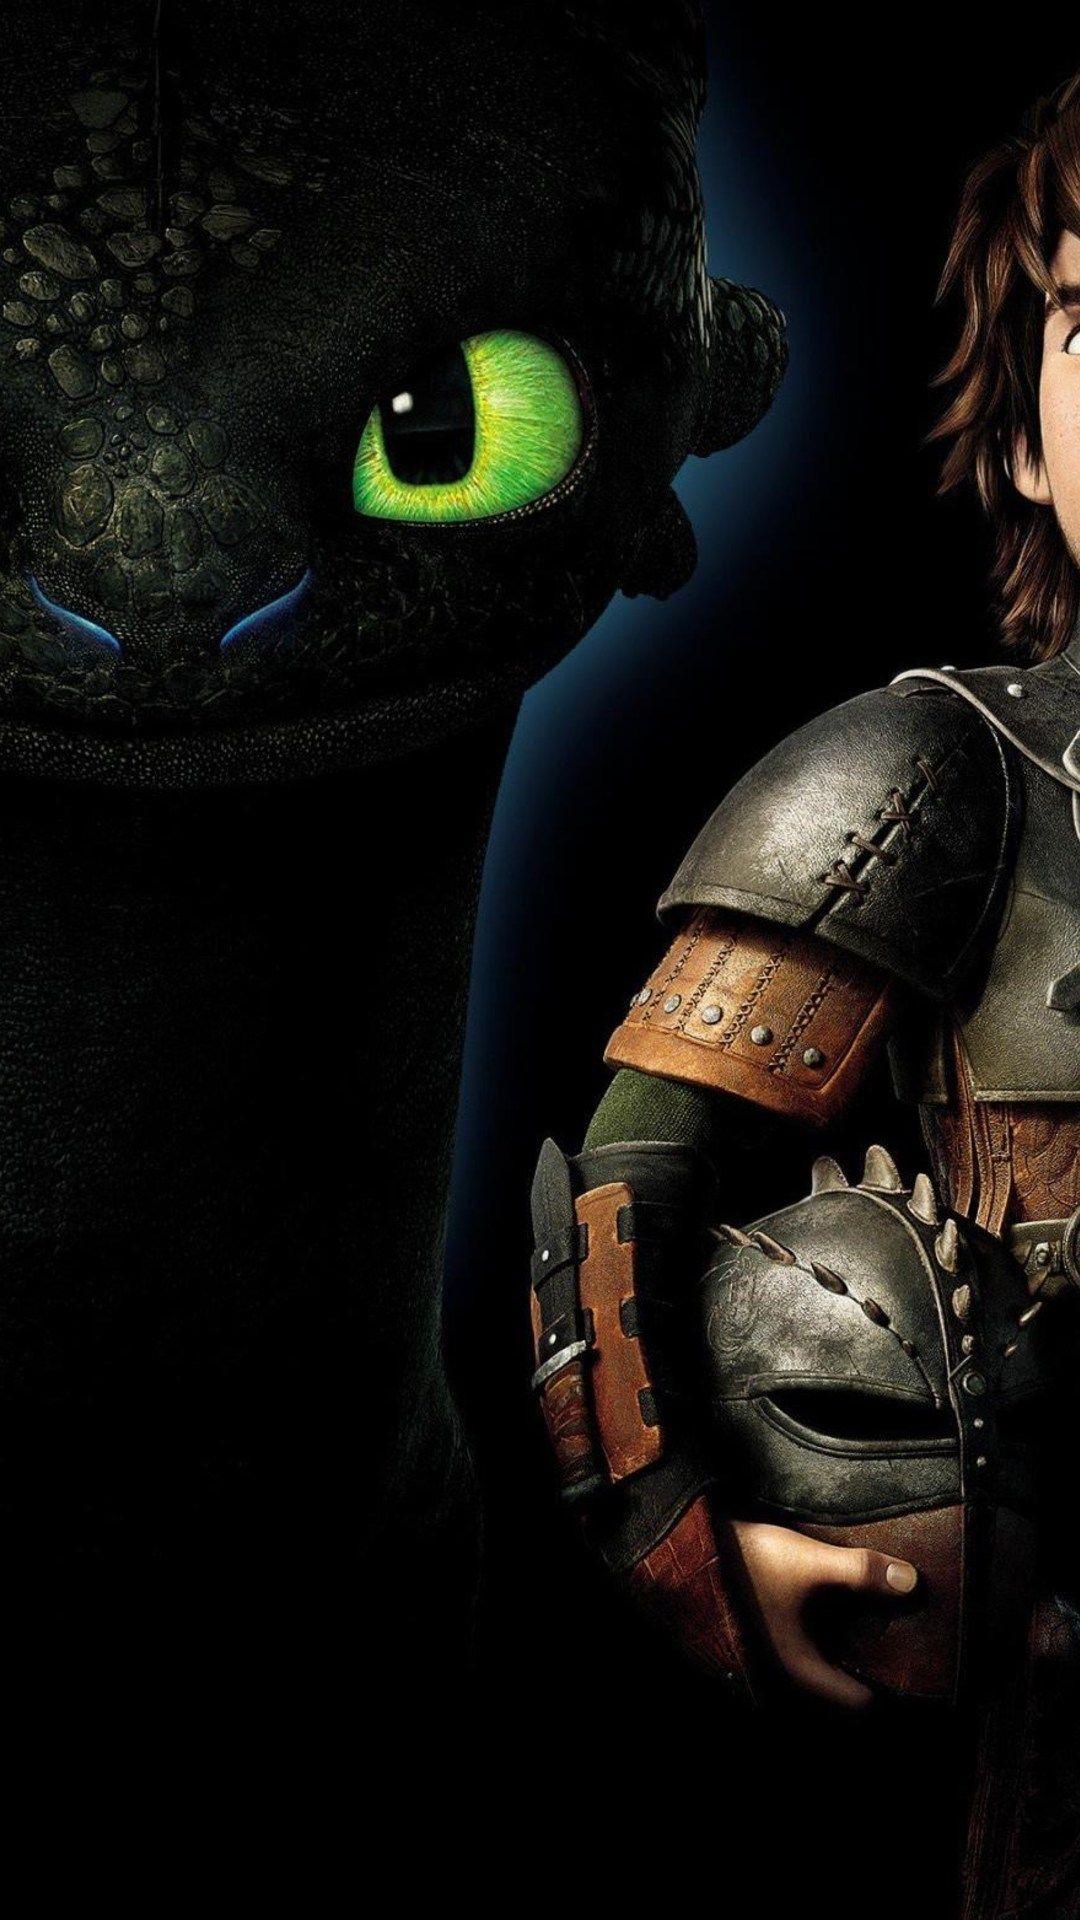 toothless wallpaper iphone